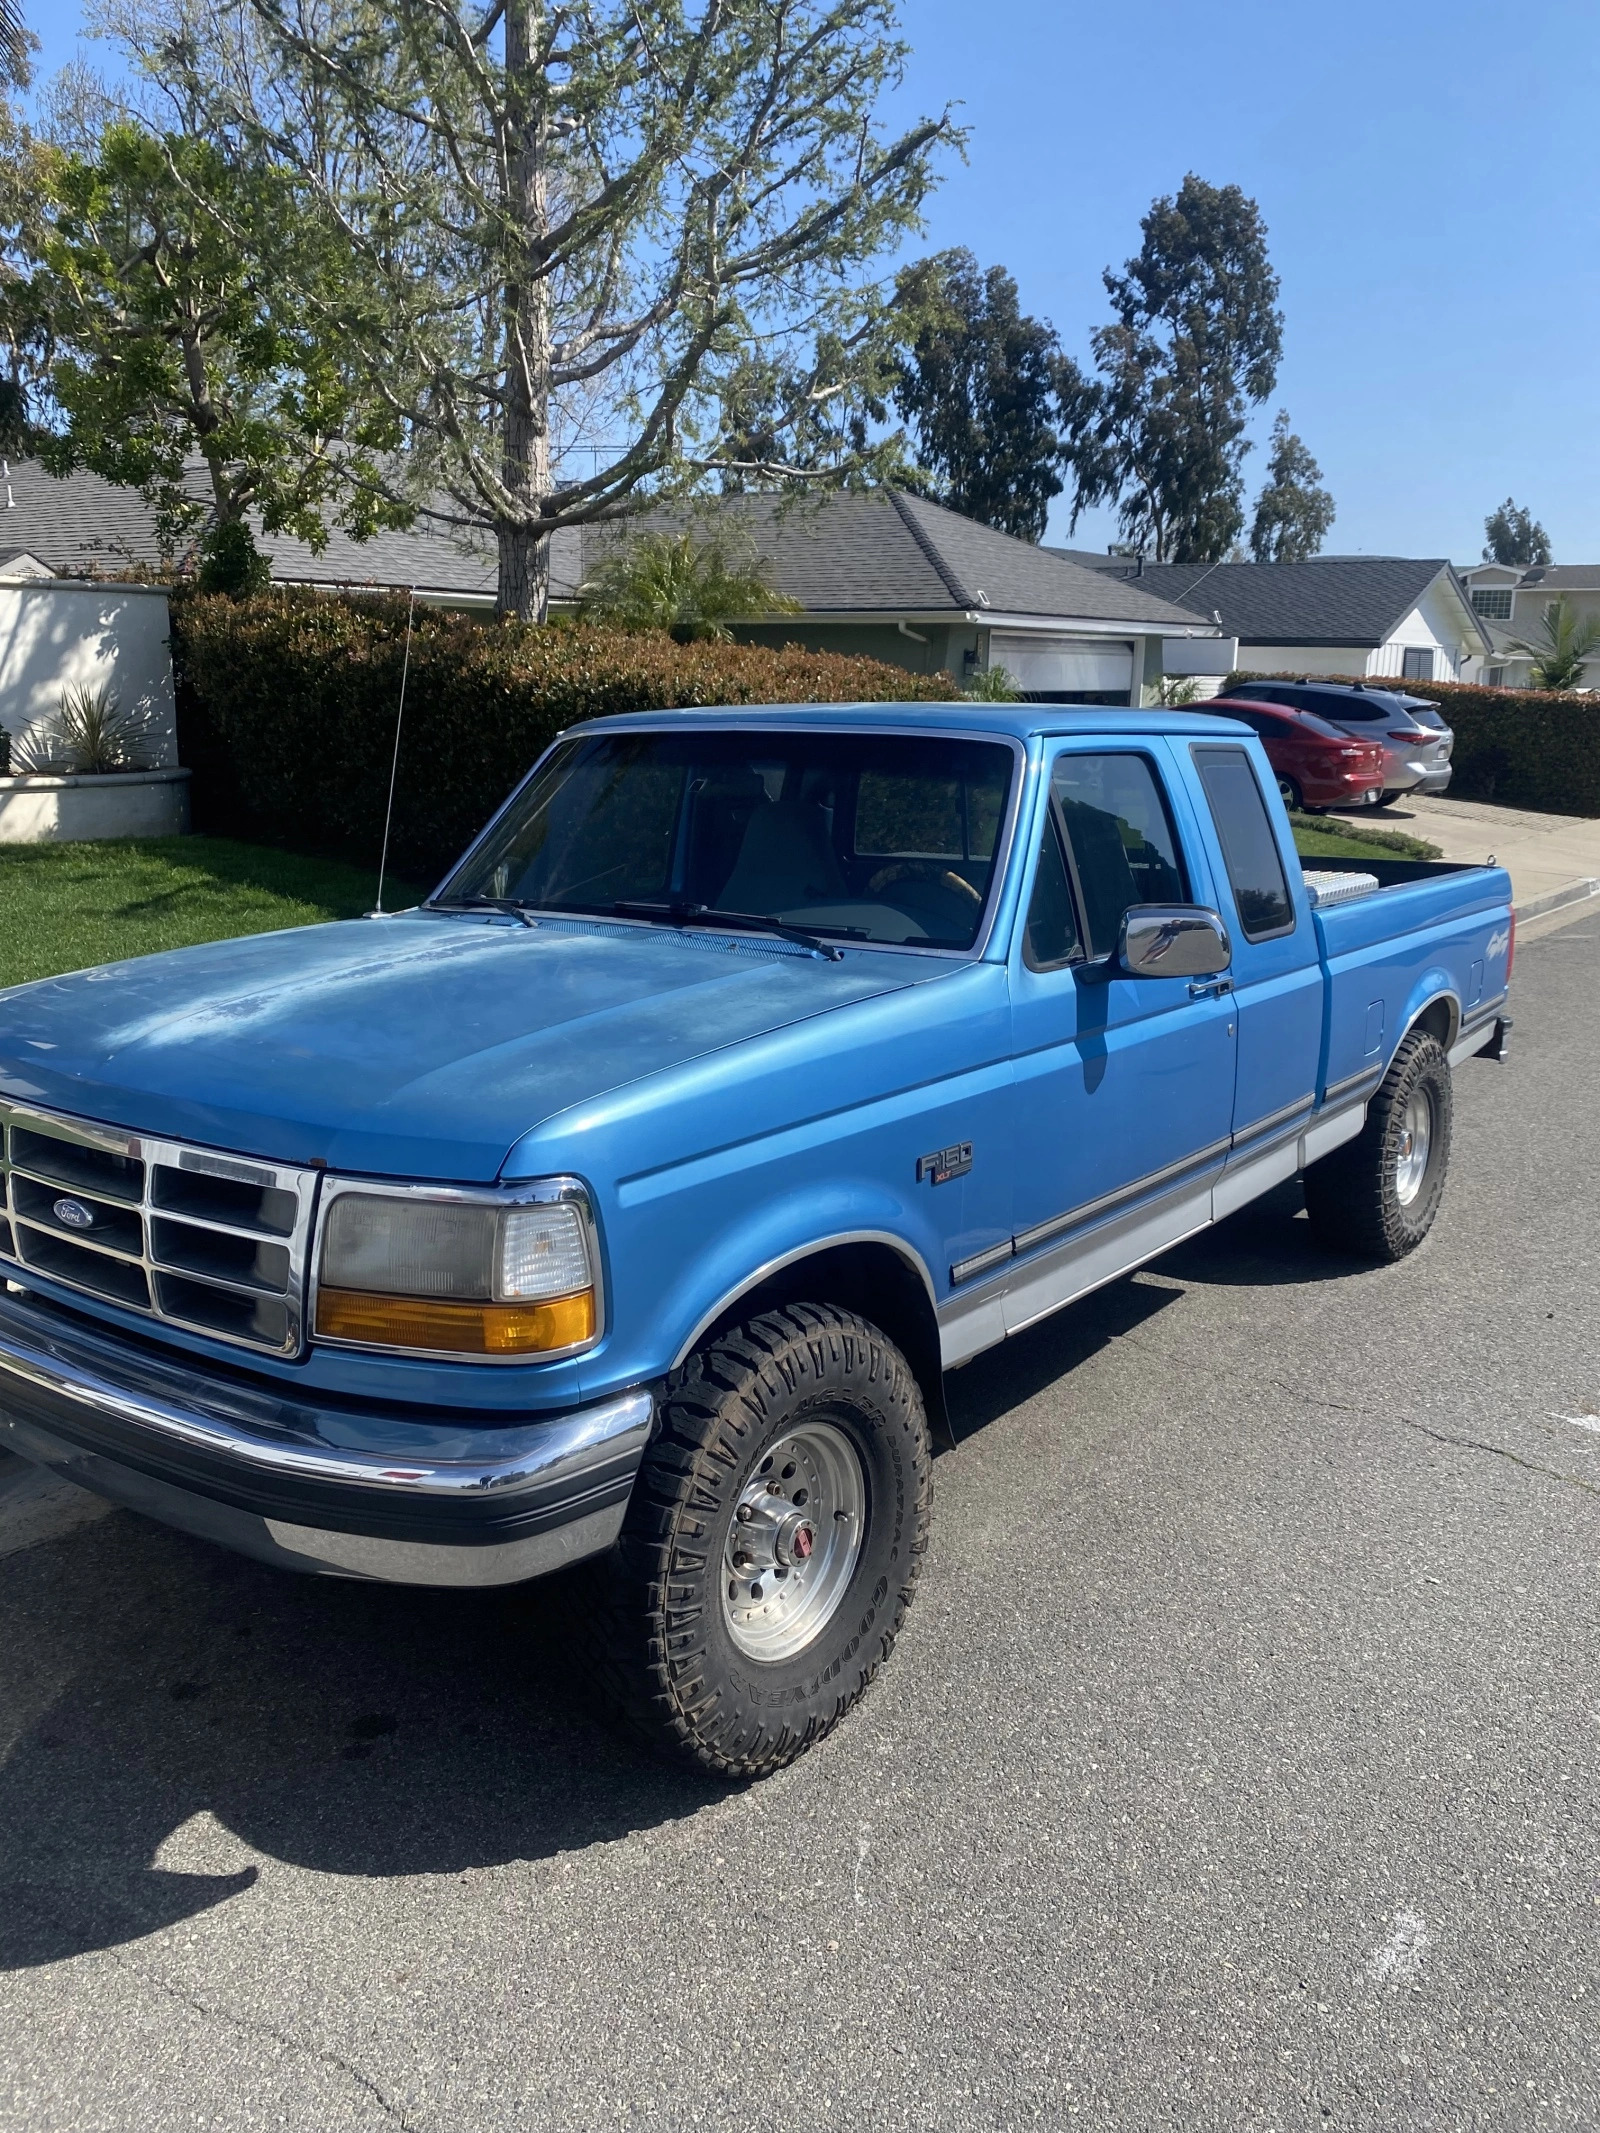 For Sale: 1992 Ford-150 extended cab 4x4 obs new motor good condition  - photo1